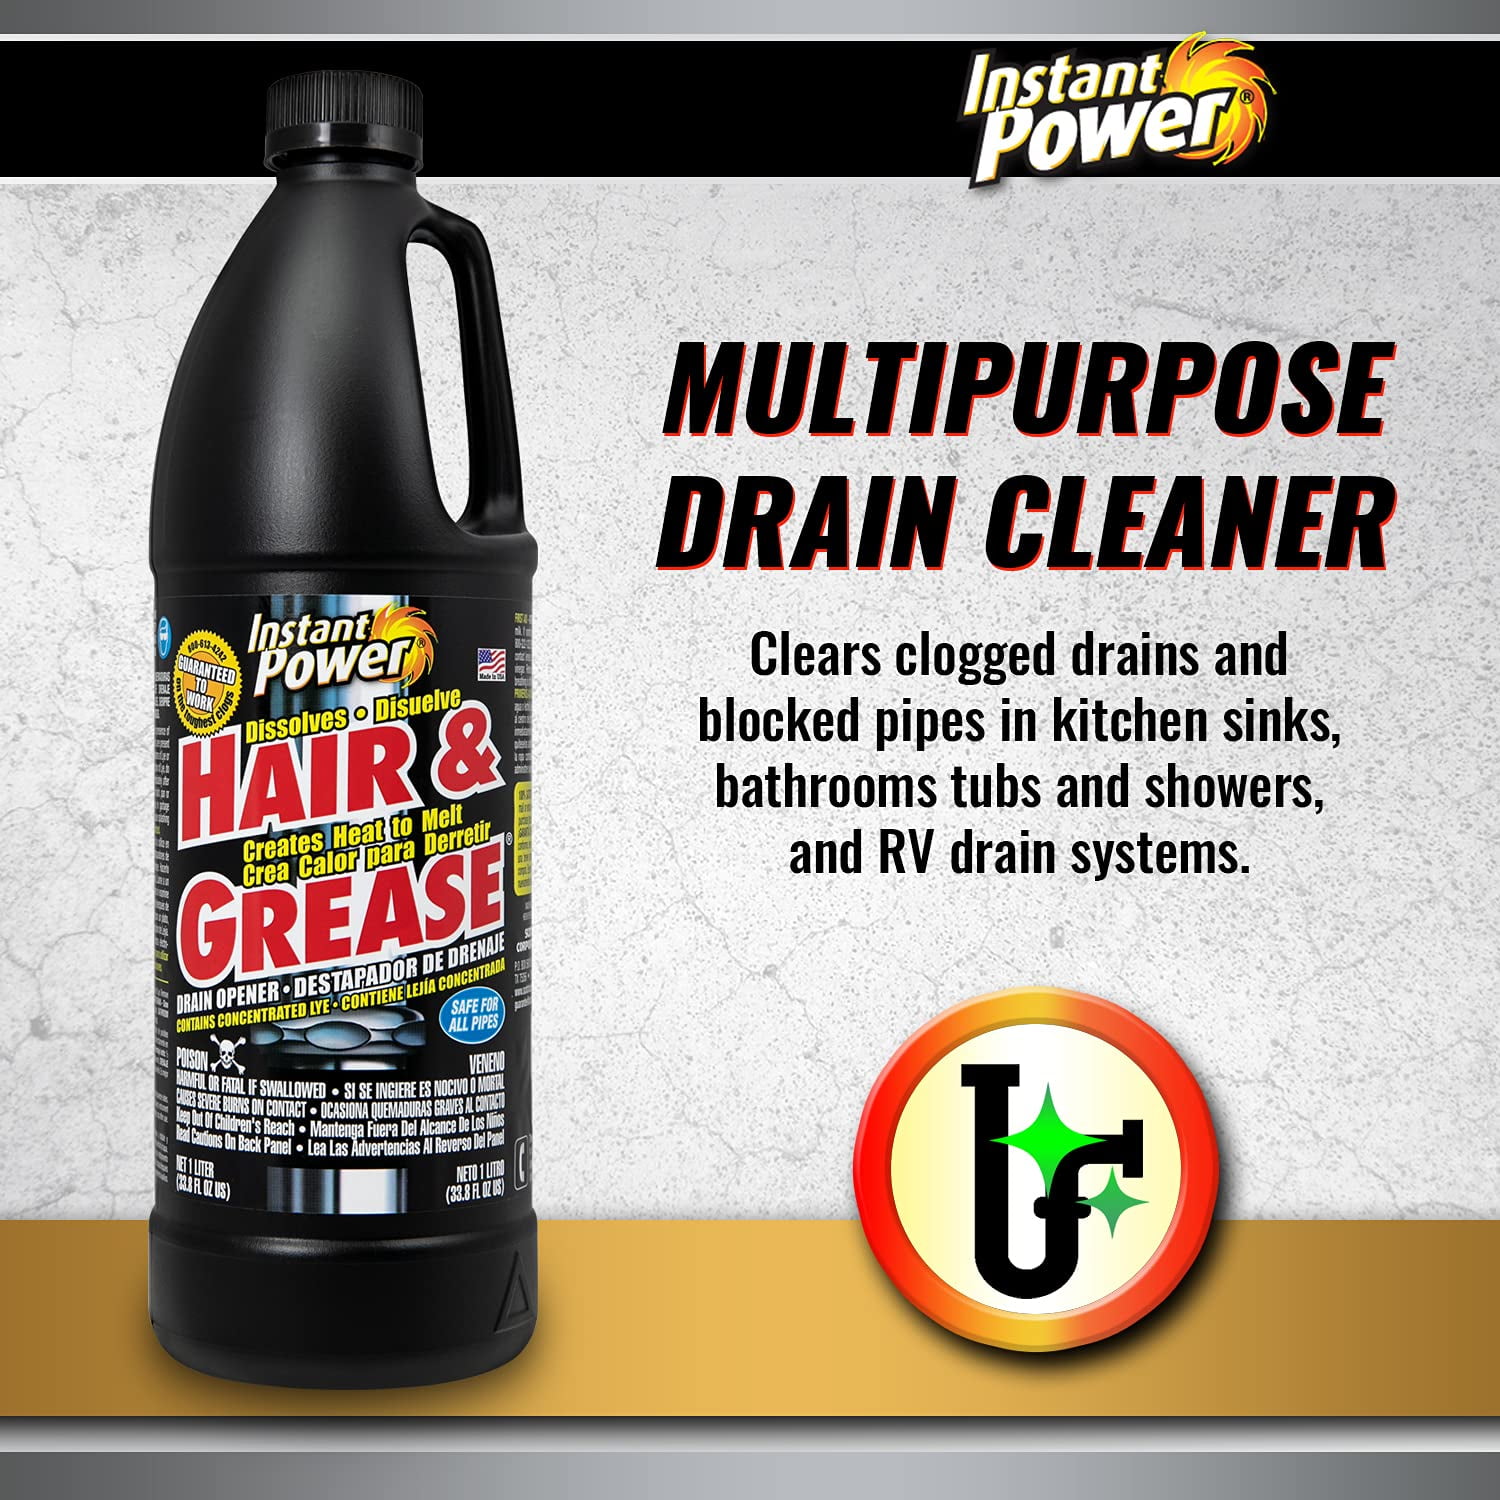 Instant Power Hair and Grease Drain Cleaner, Drain Opener and Clog Remover